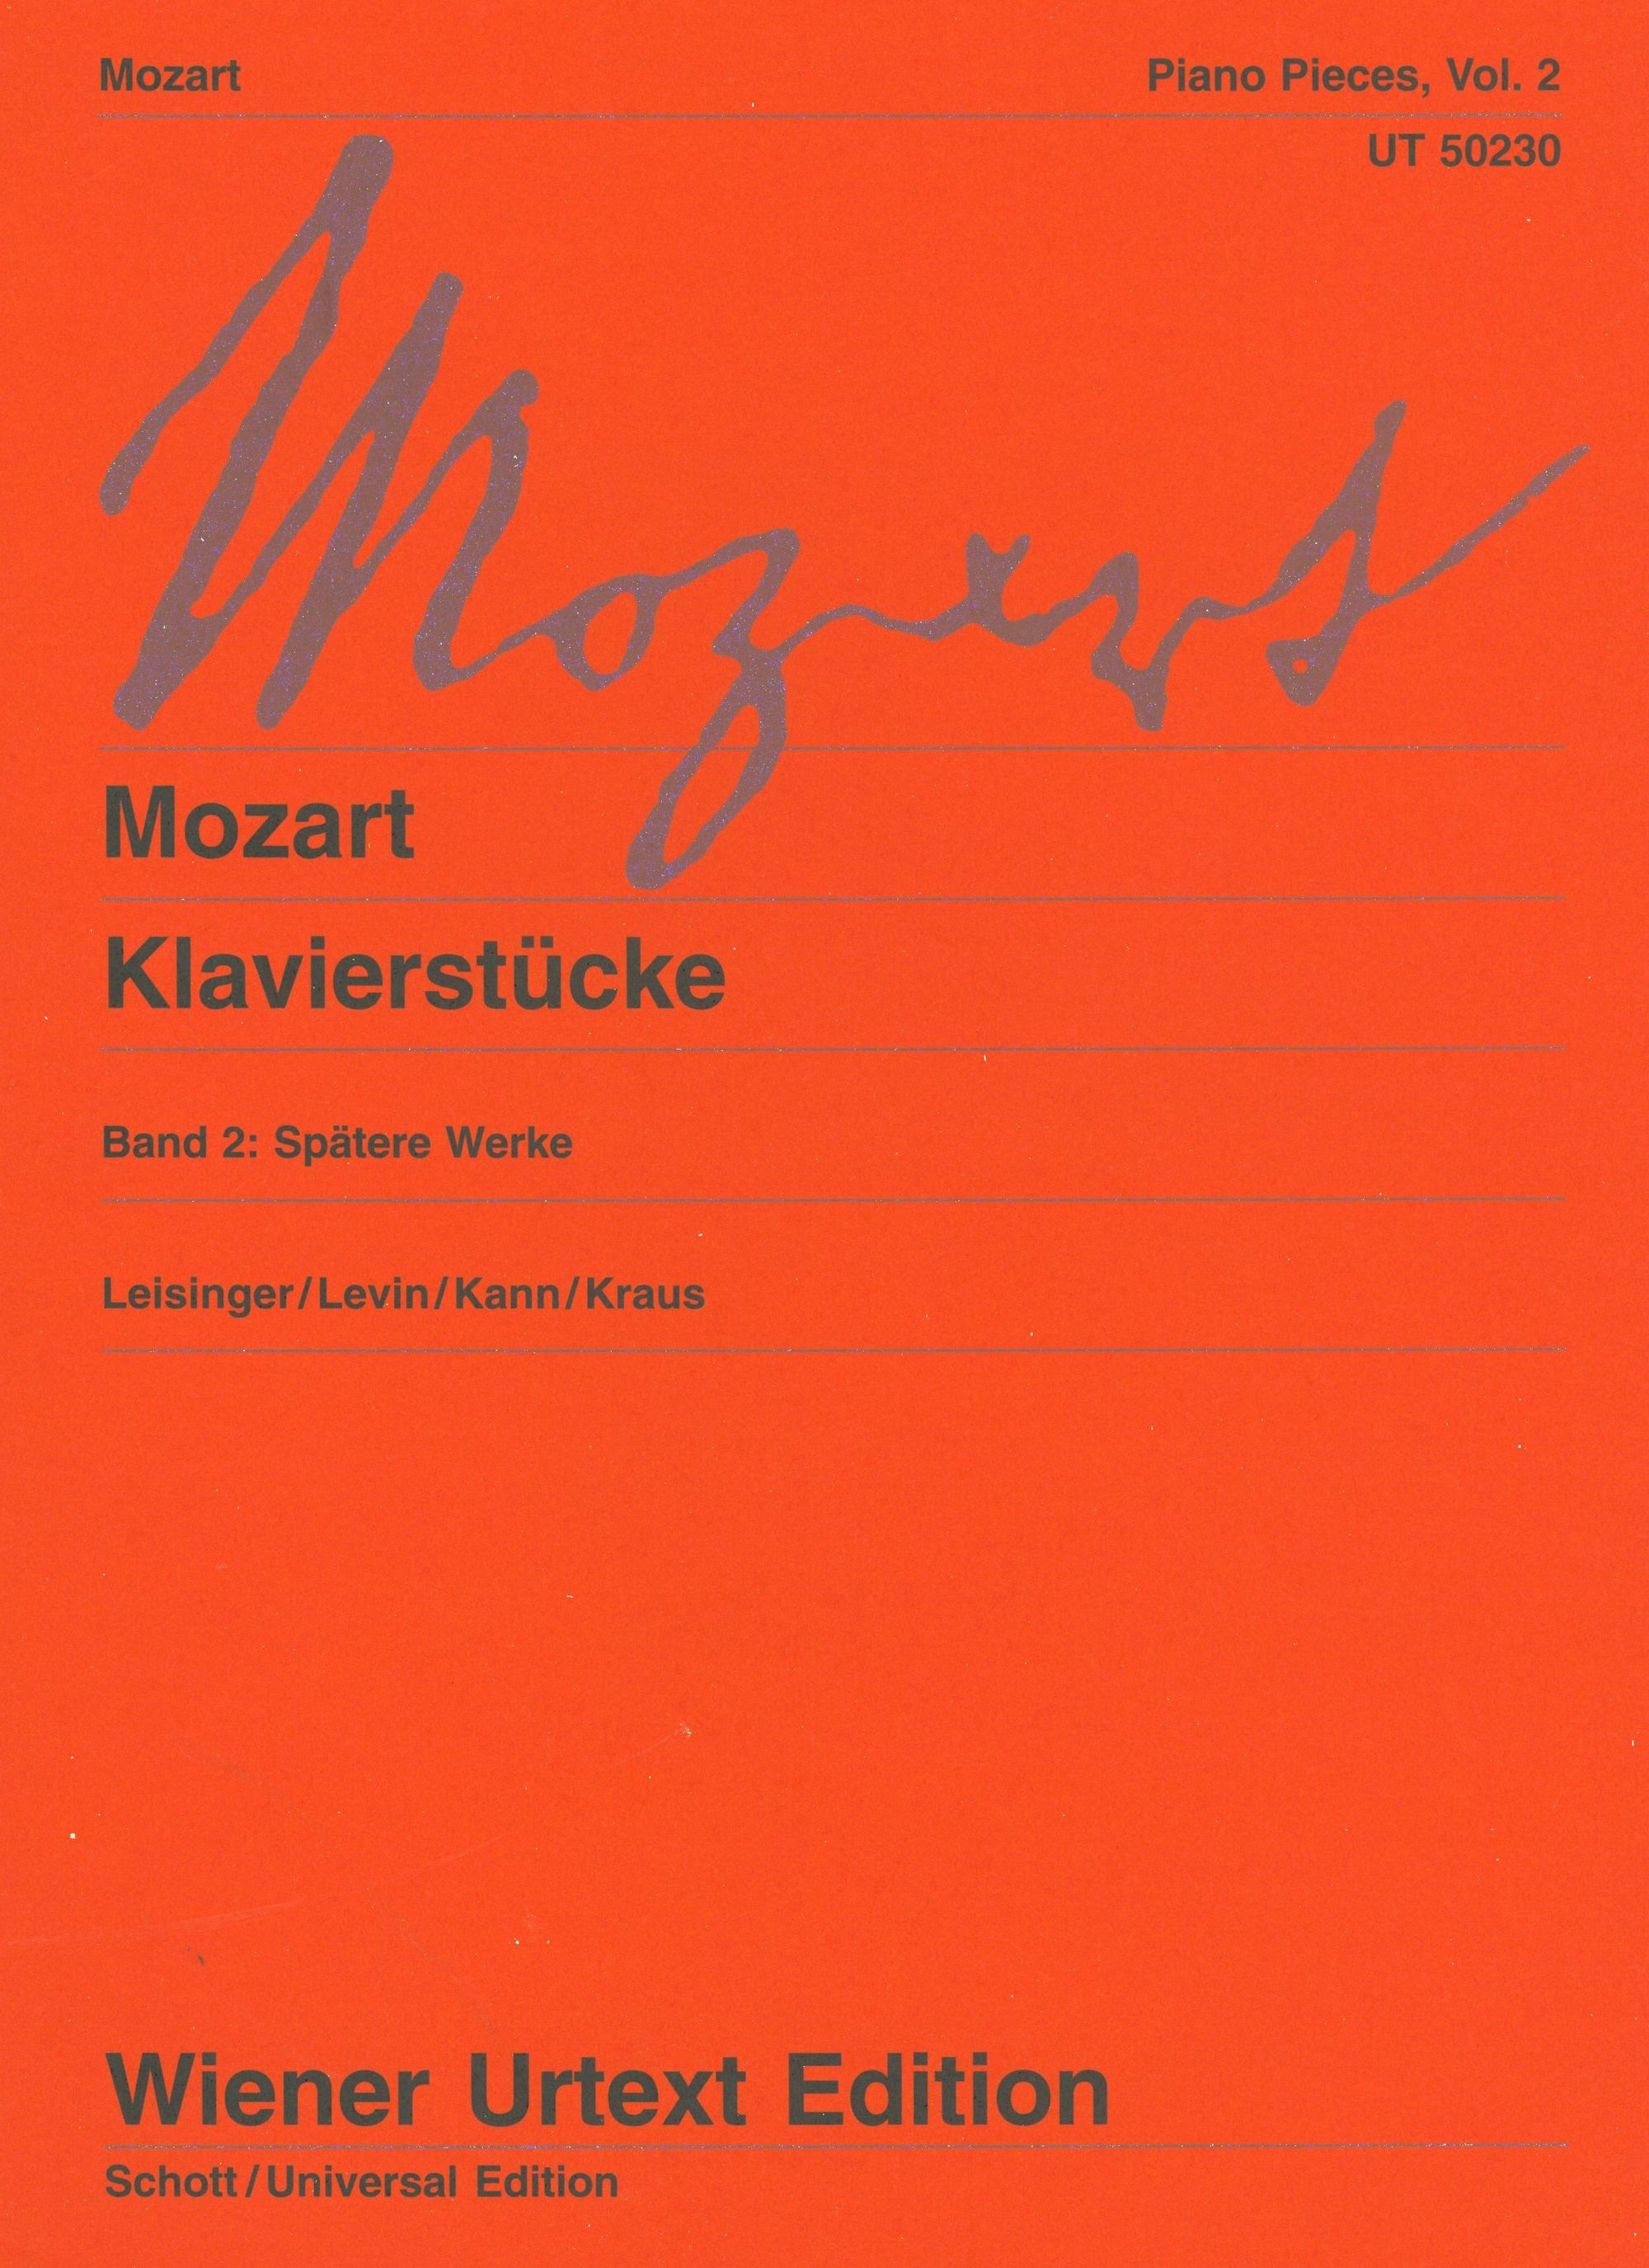 Mozart: Piano Pieces - Volume 2 (Later Works)